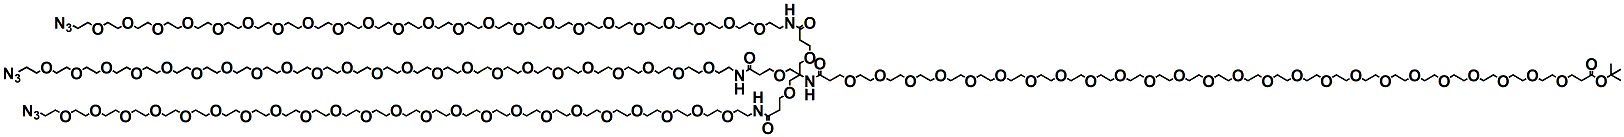 Molecular structure of the compound BP-27836